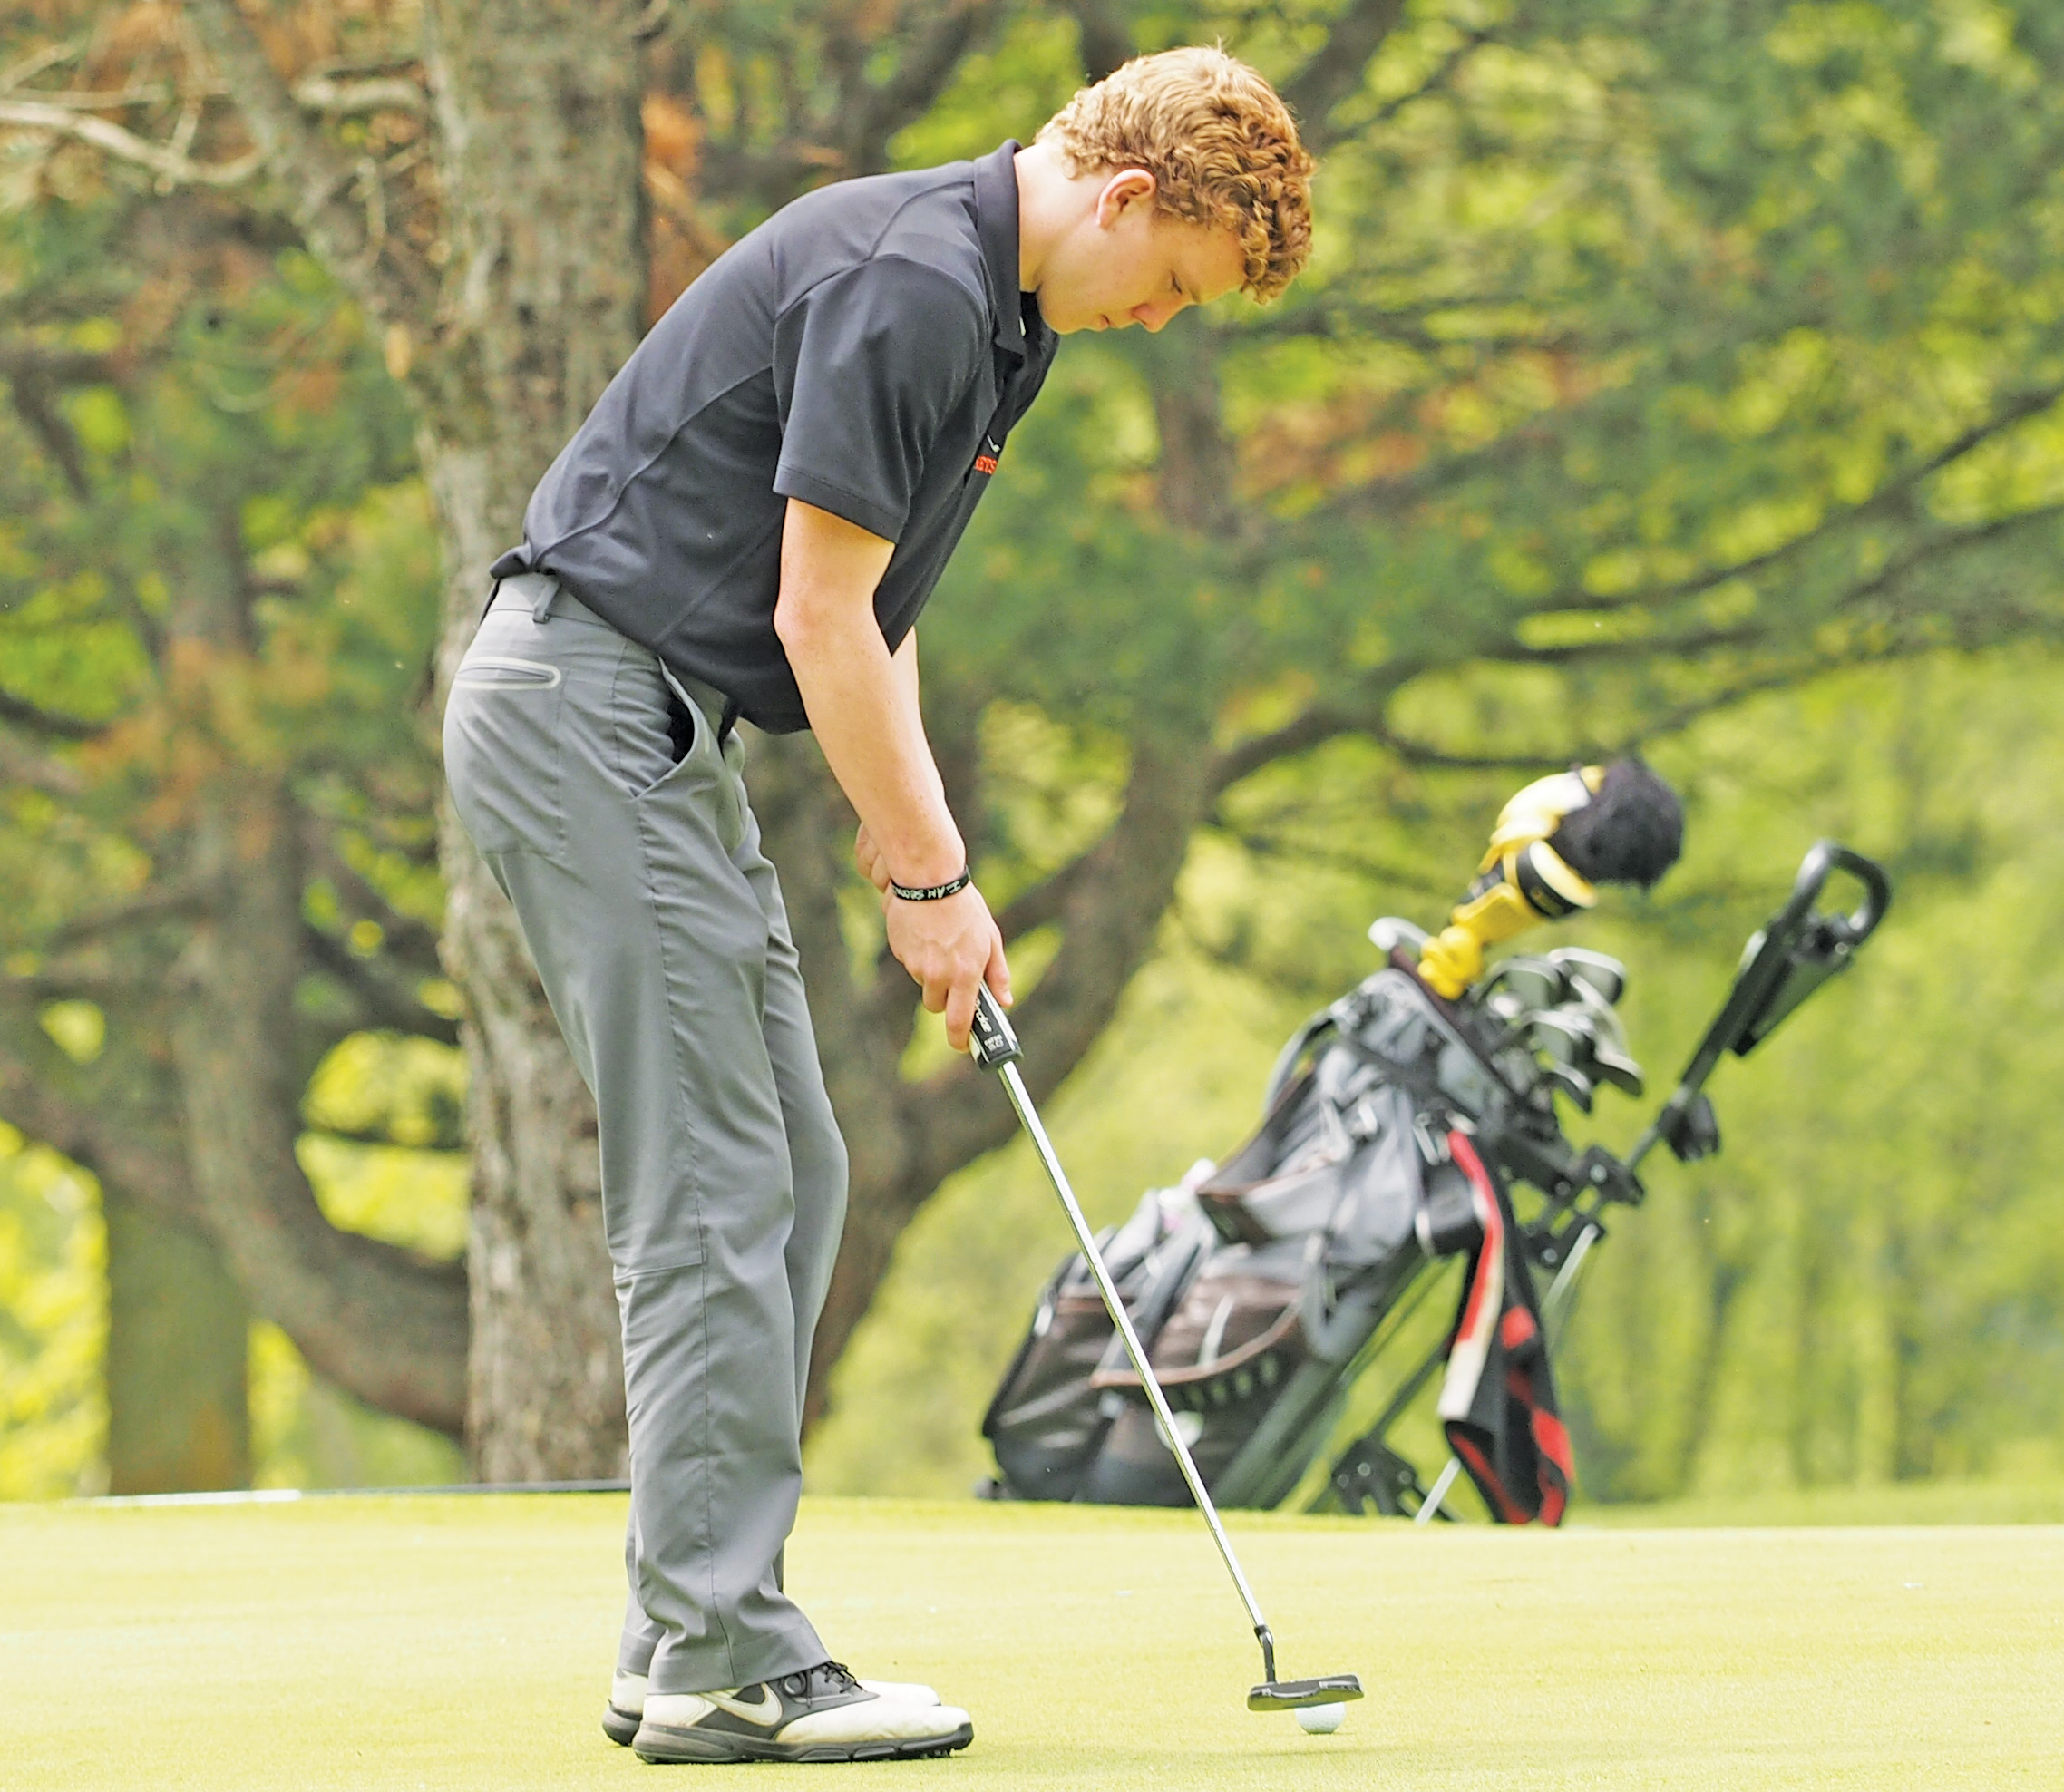 Lasher, Molstead earn all-conference honors as Comet golfers close season